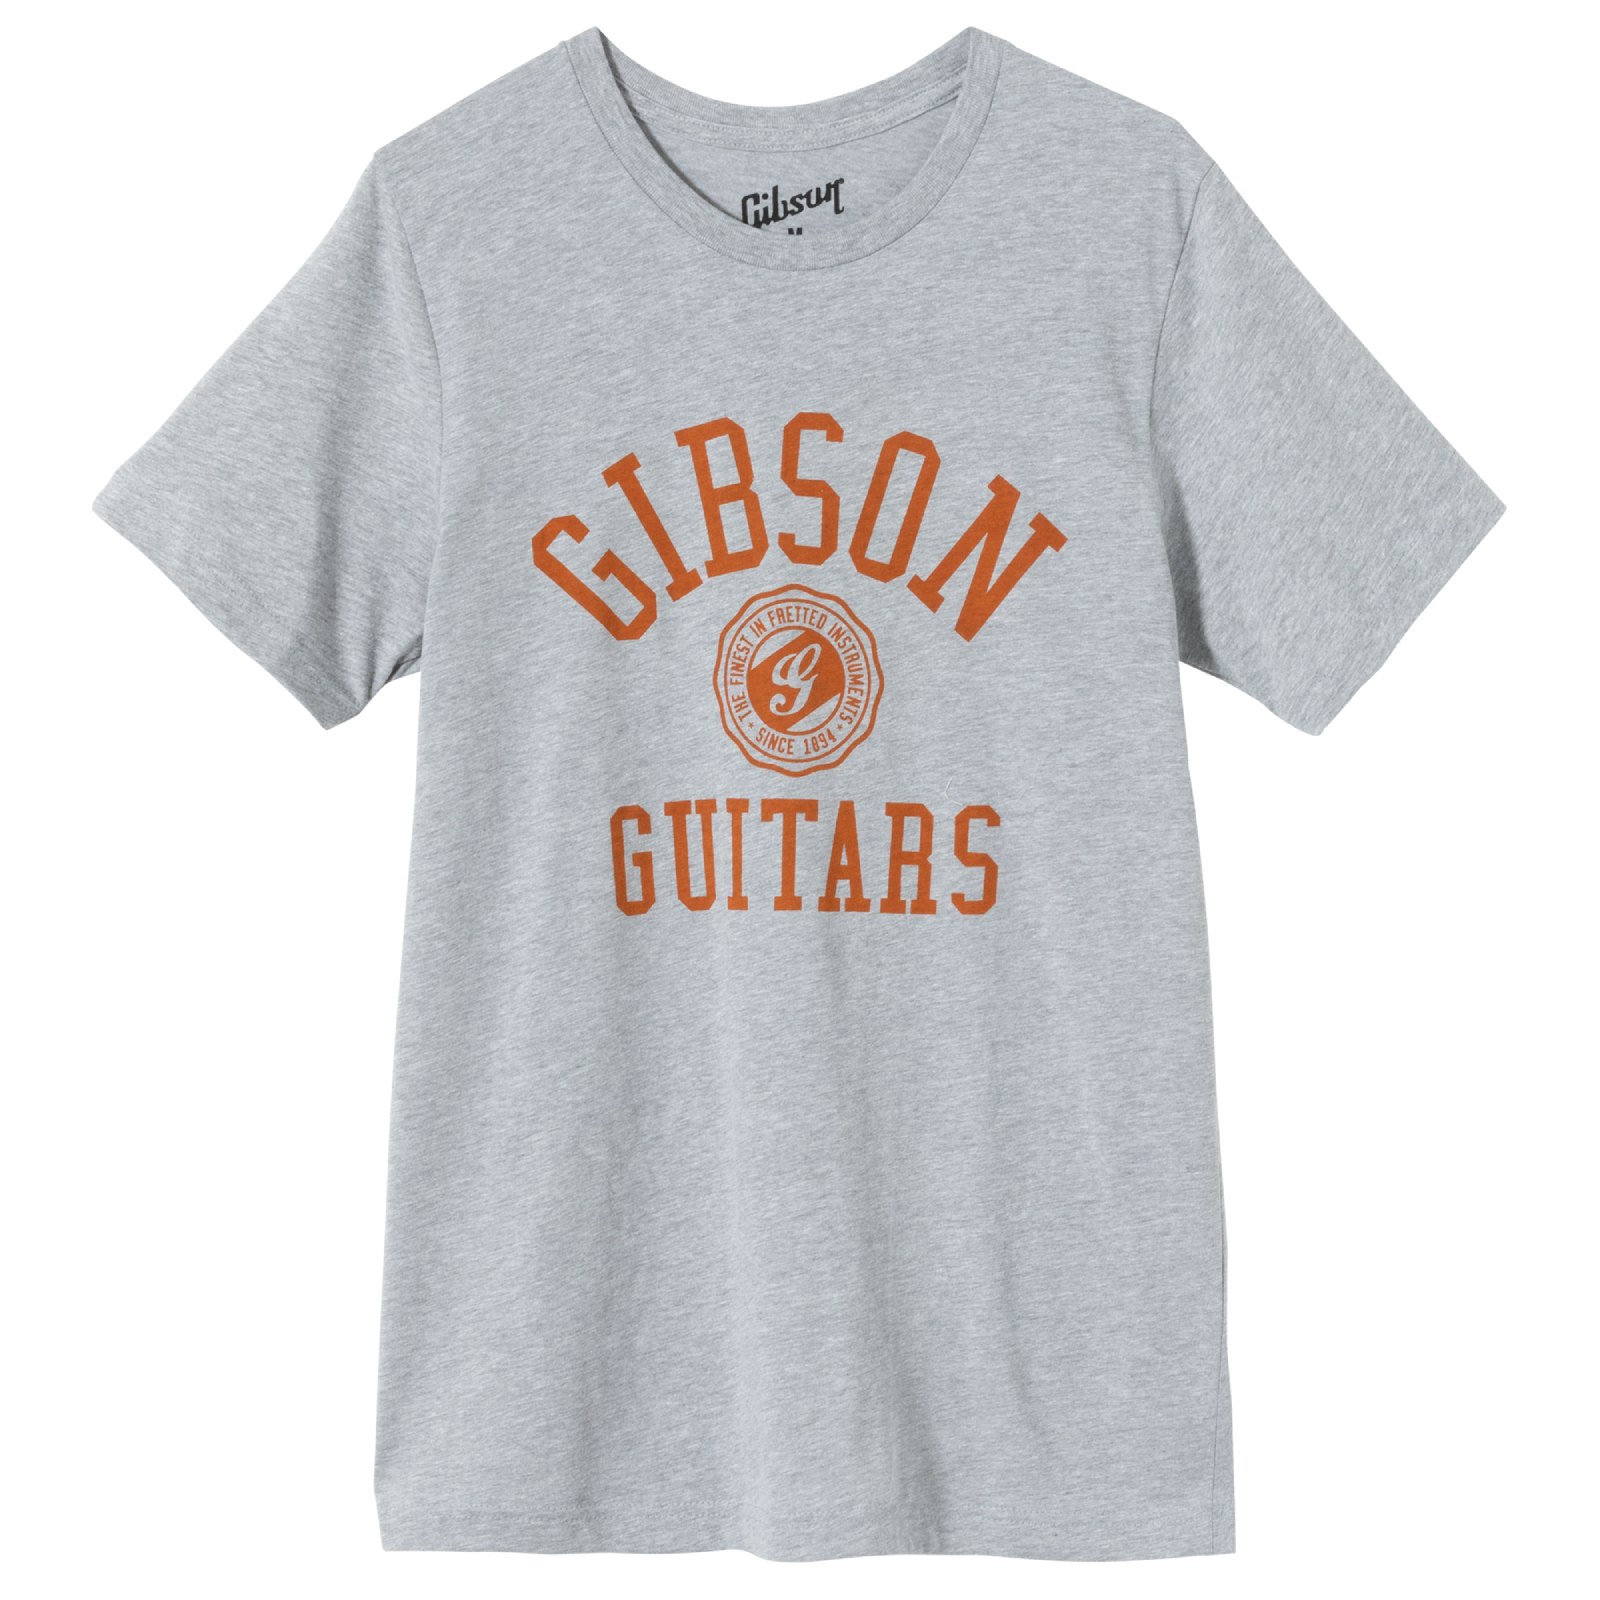 GIBSON ACCESSORIES COLLEGIATE TEE HEATHER GRAY TAILLE M